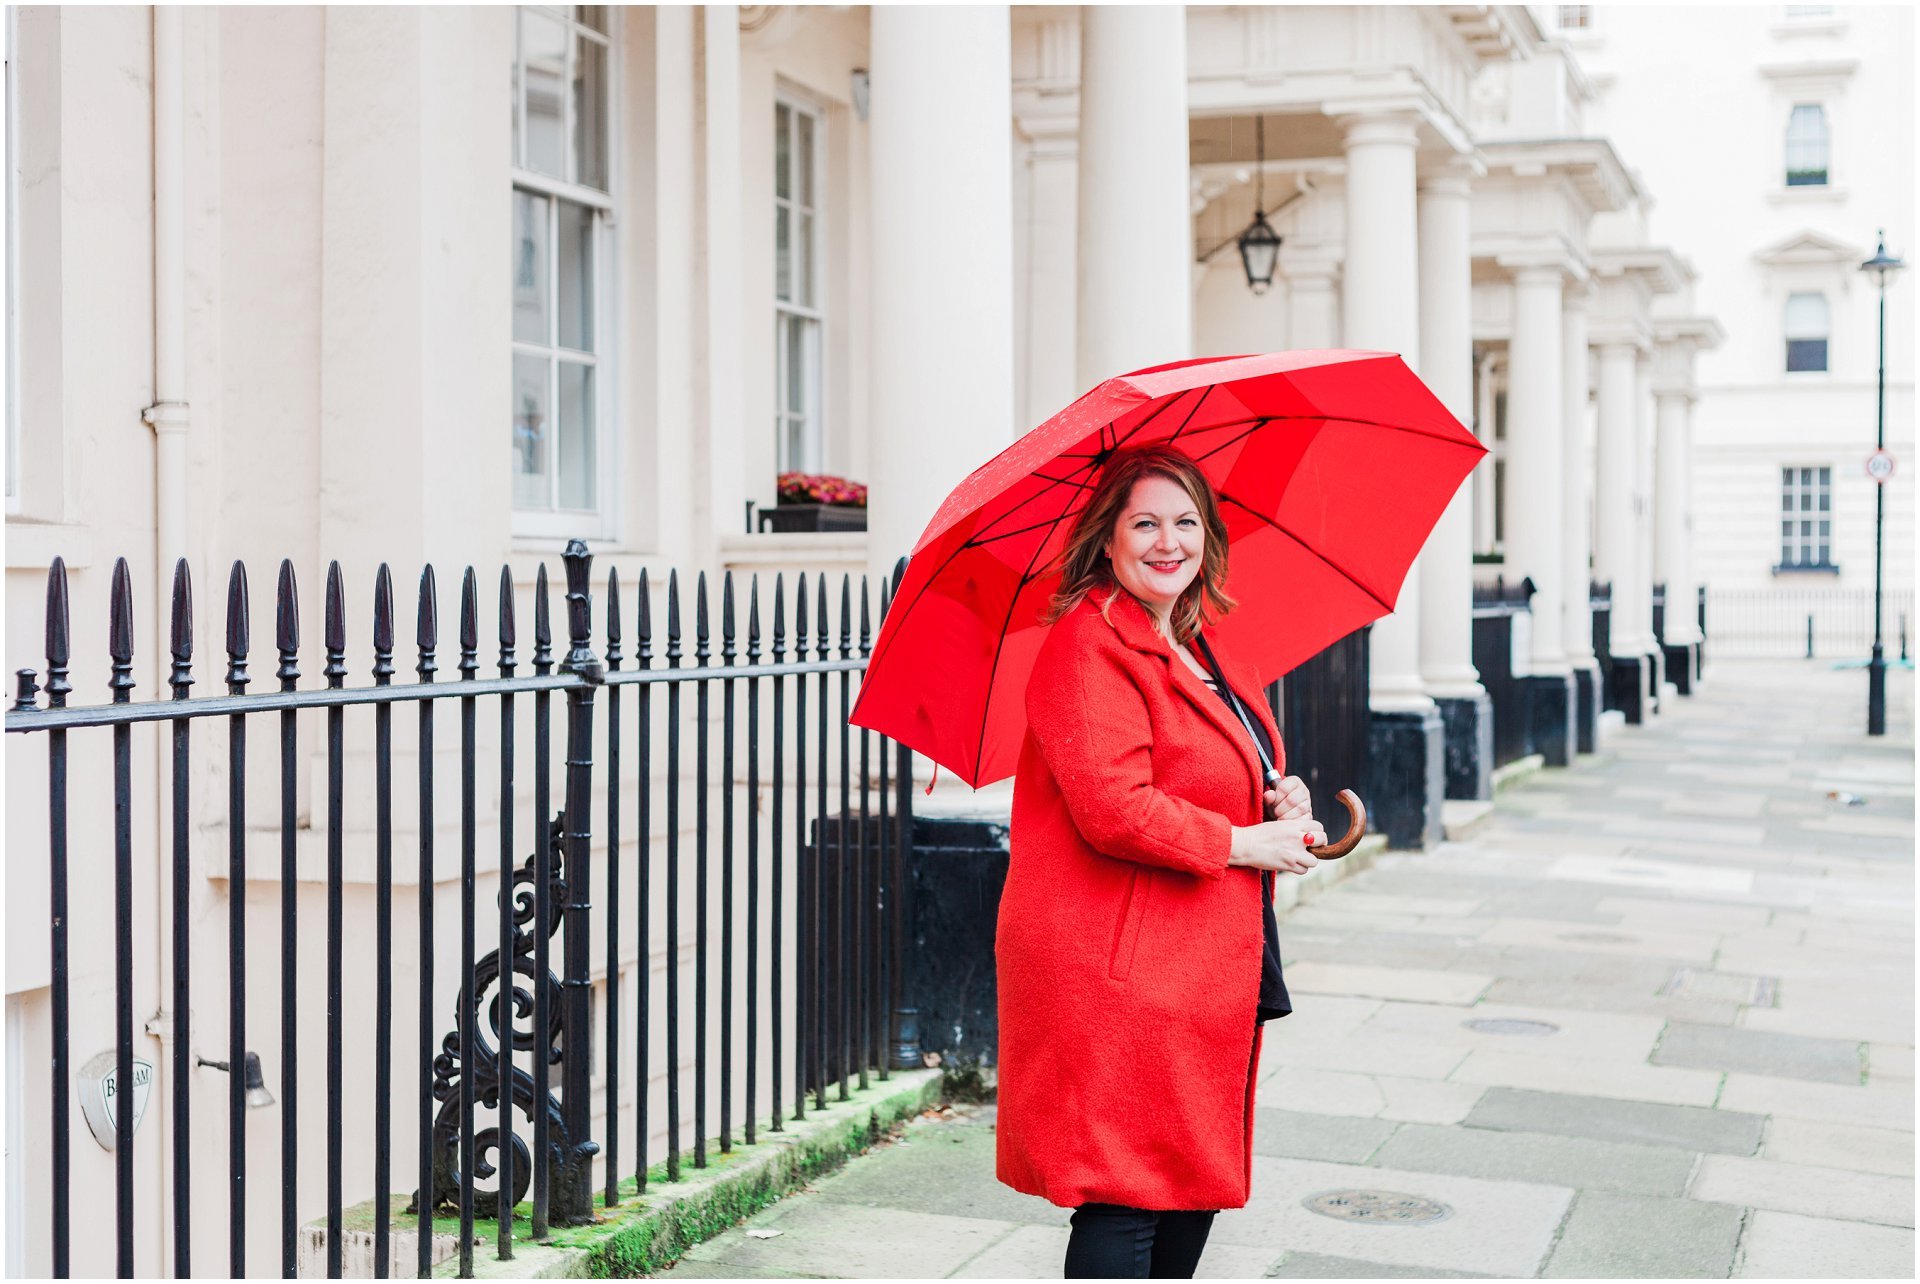 Belgravia London brand shoot with bright red umbrella for Claire Louise Branding. Images by London brand photographer AKP Branding Stories